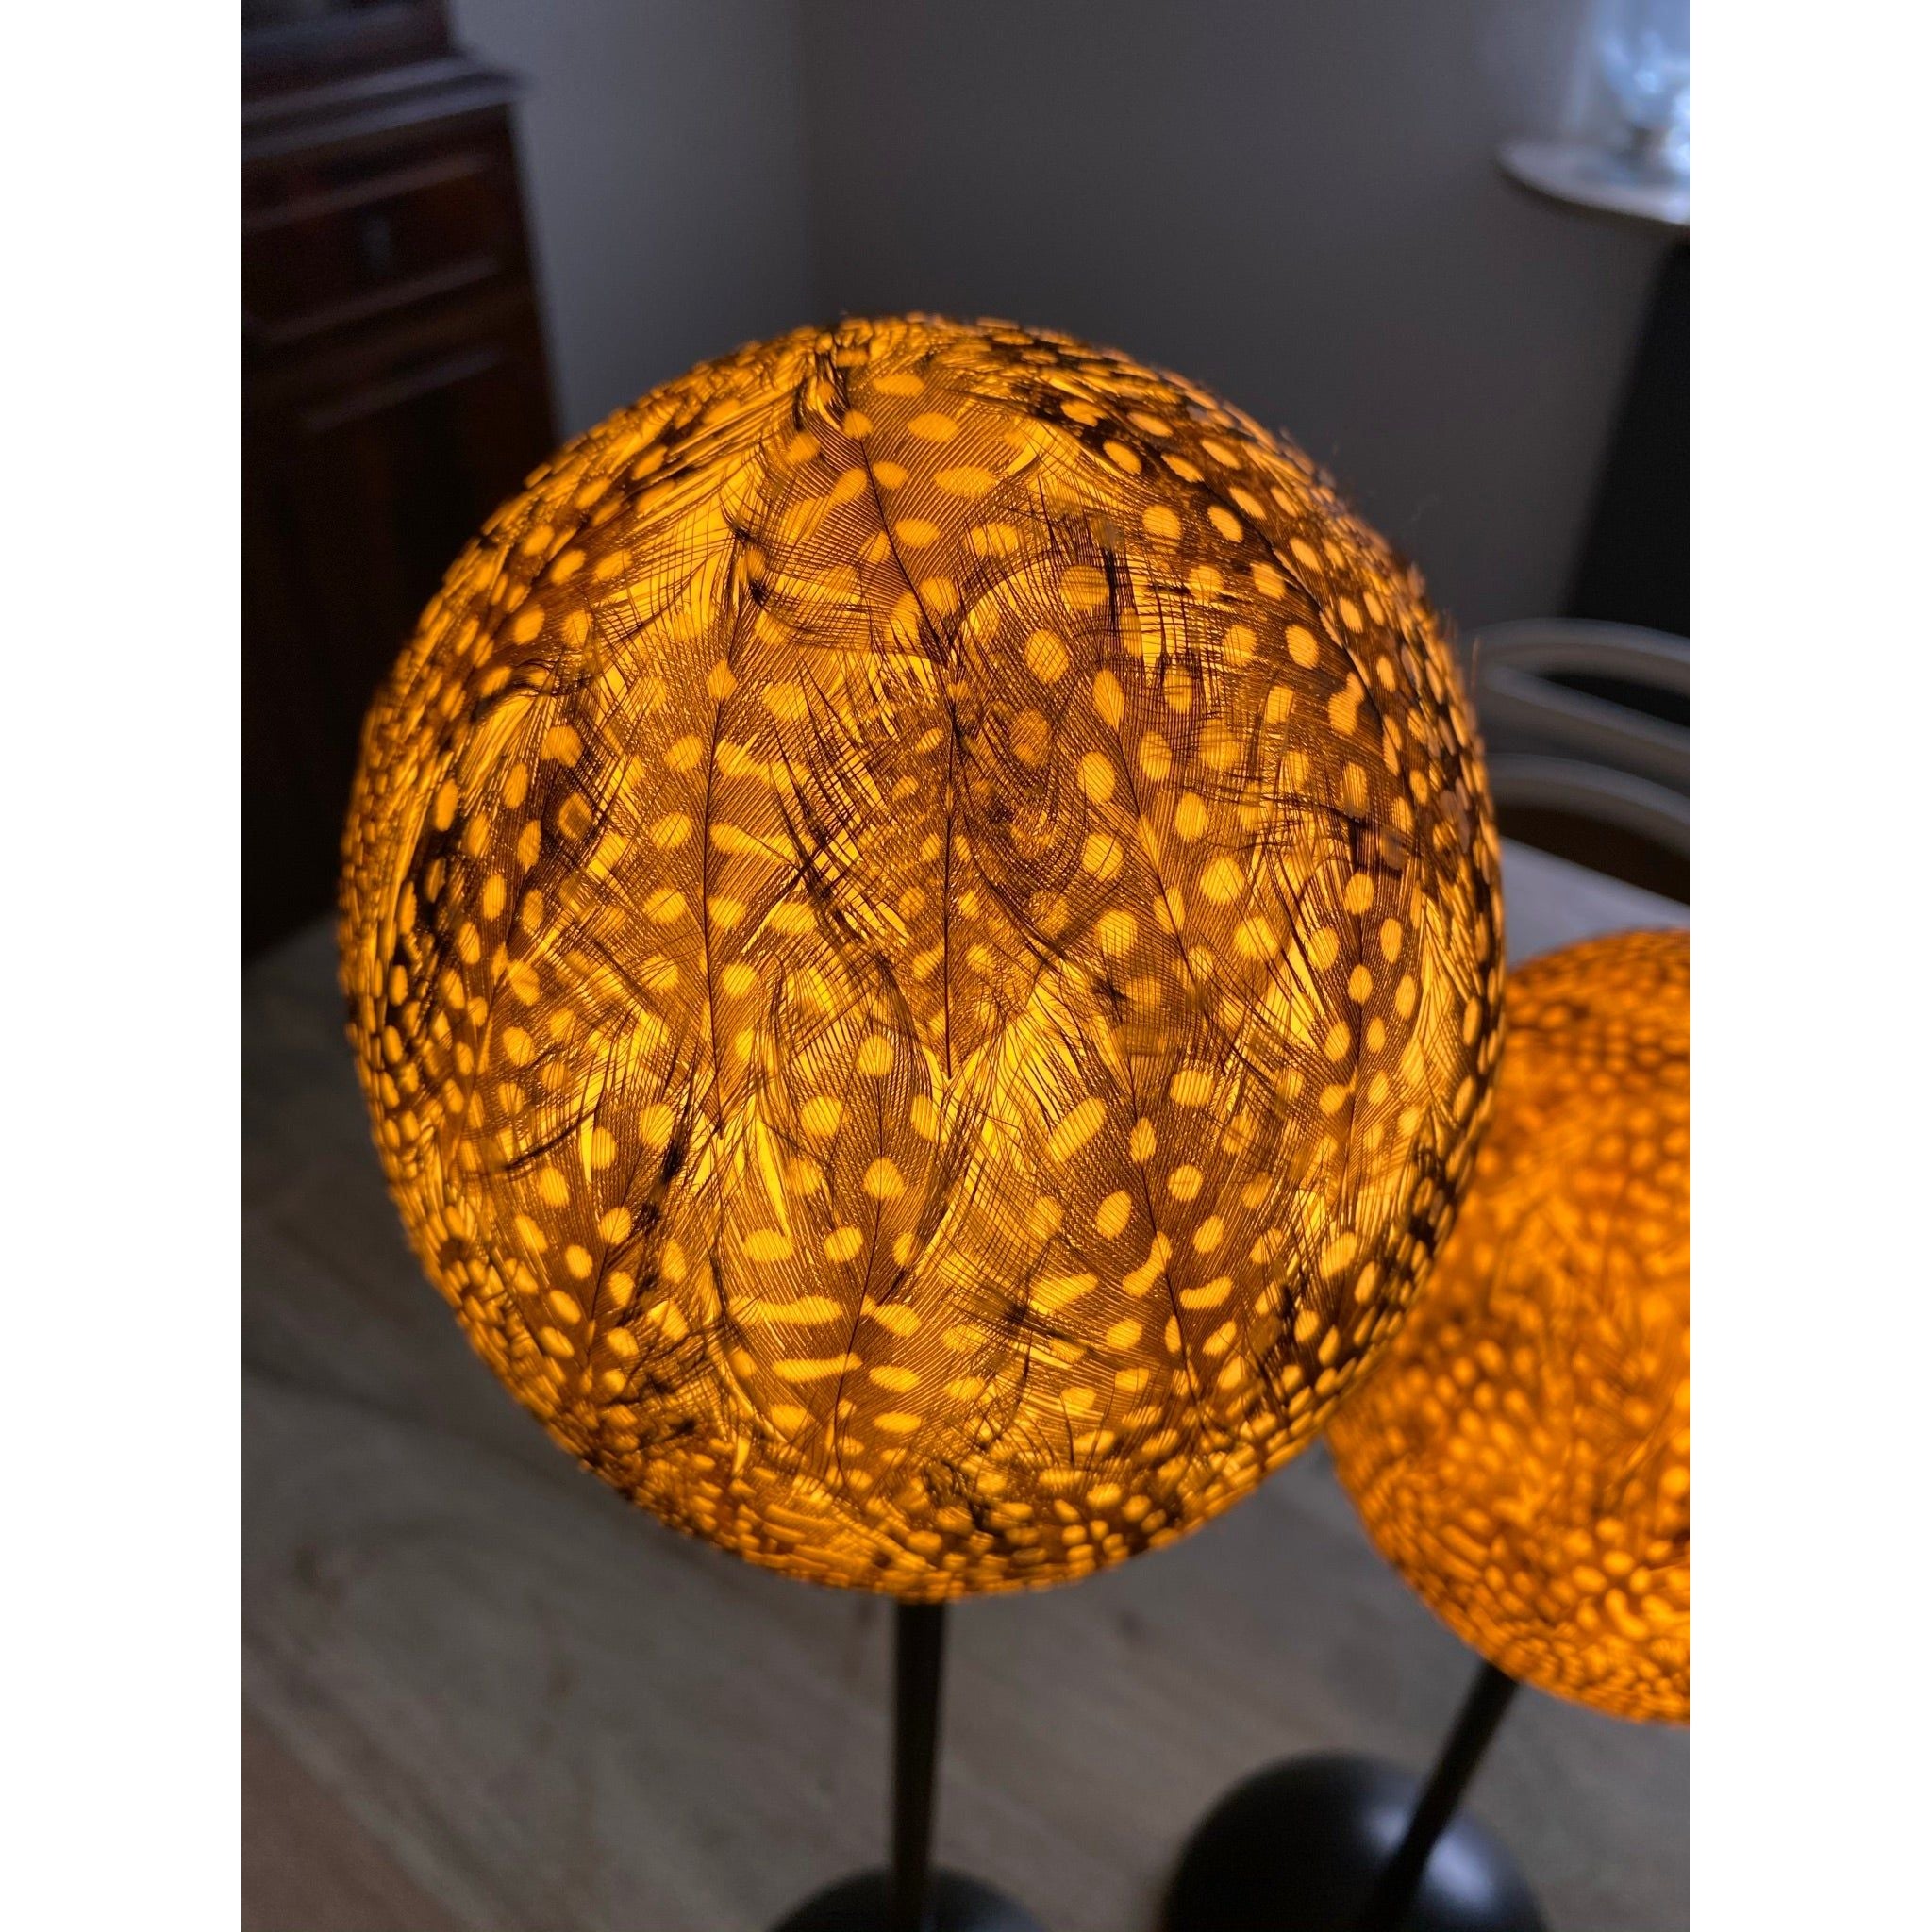 Ostrich egg lamp decorated all around with real guinea fowl feathers